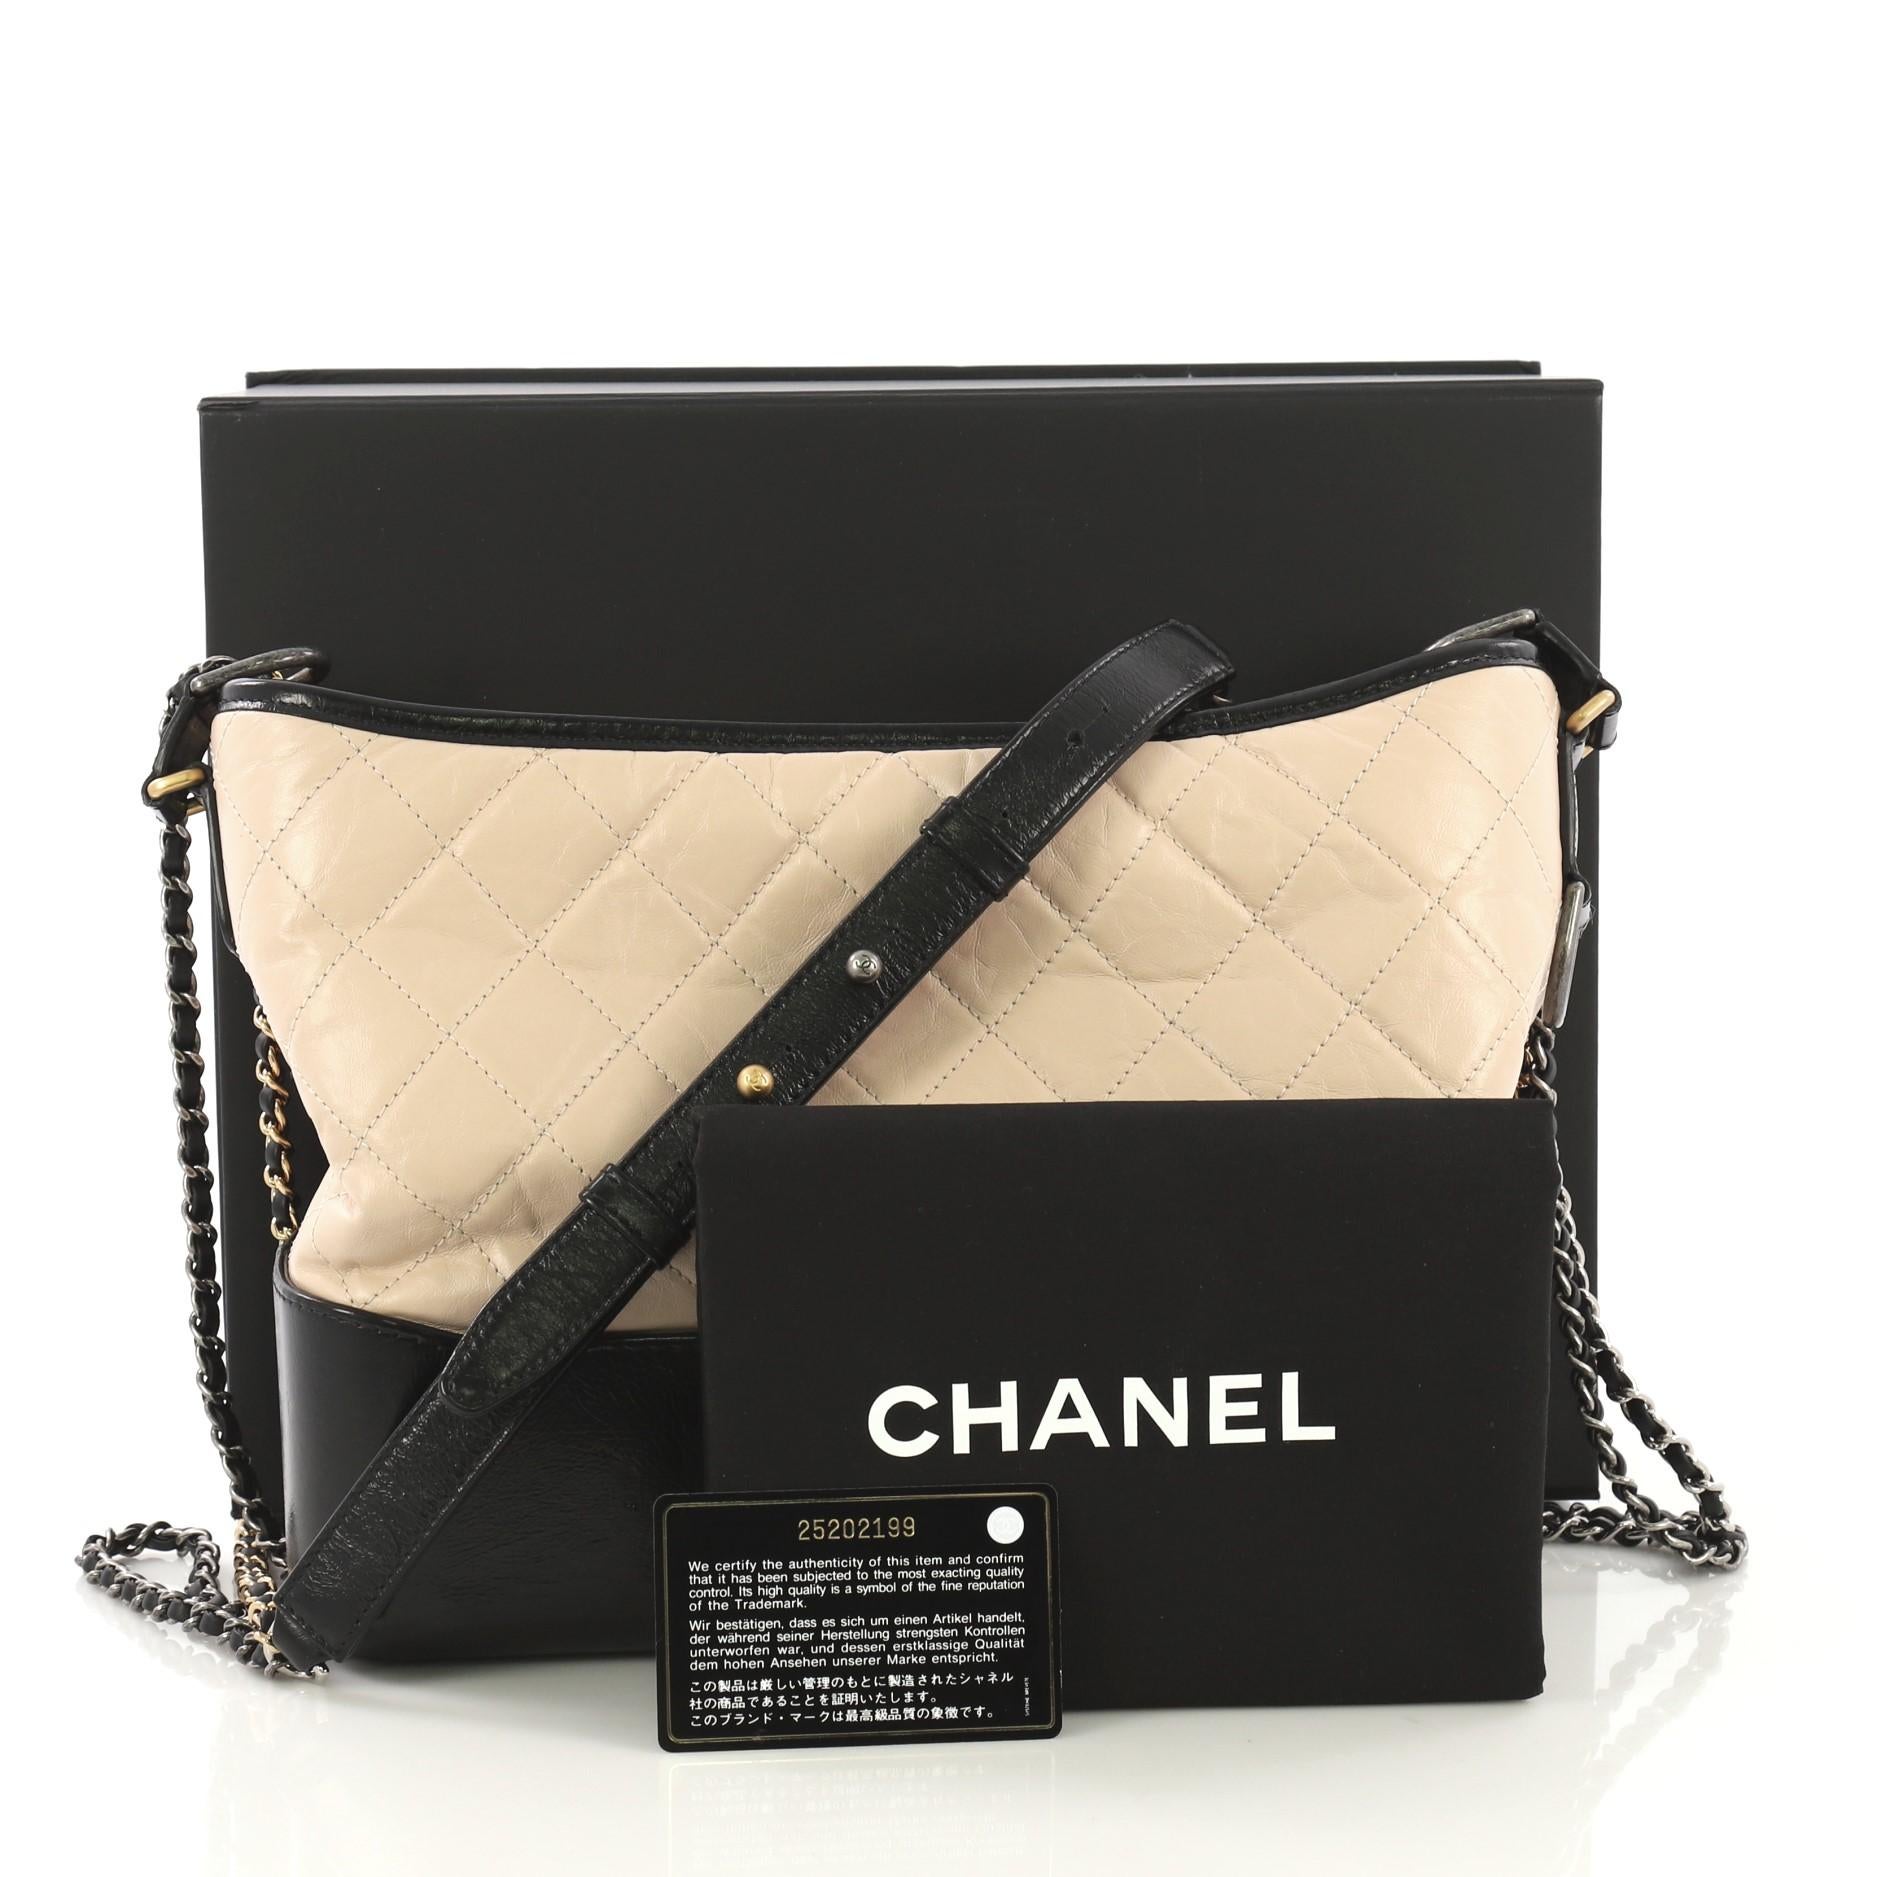 This Chanel Gabrielle Hobo Quilted Aged Calfskin Medium, crafted from black and nude quilted aged calfskin, features woven-in leather chain with leather pad, leather zip pull with CC logo, and aged gold and silver-tone hardware. Its zip closure